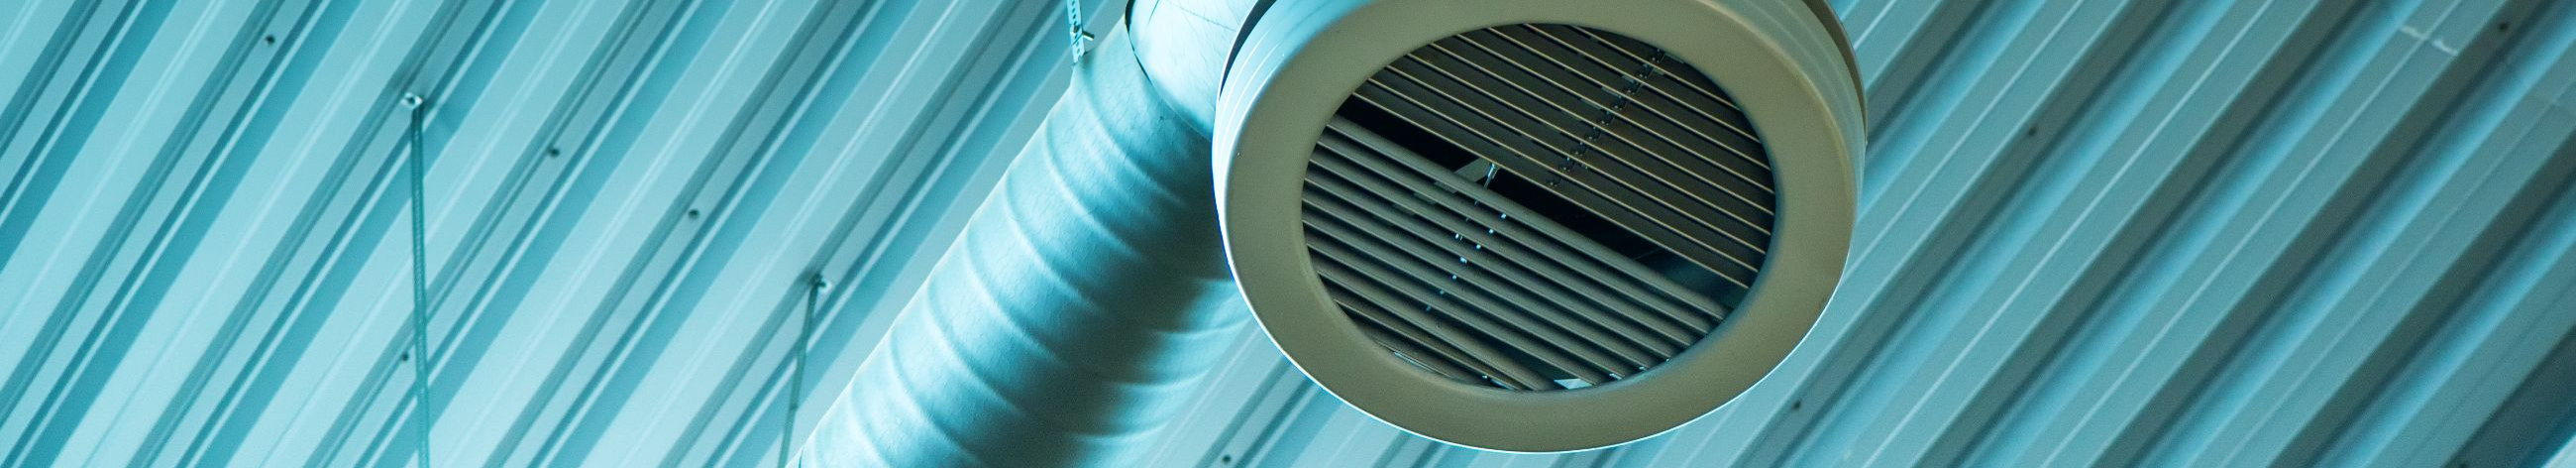 We specialize in comprehensive heating, ventilation, and plumbing services to ensure optimal indoor environments.